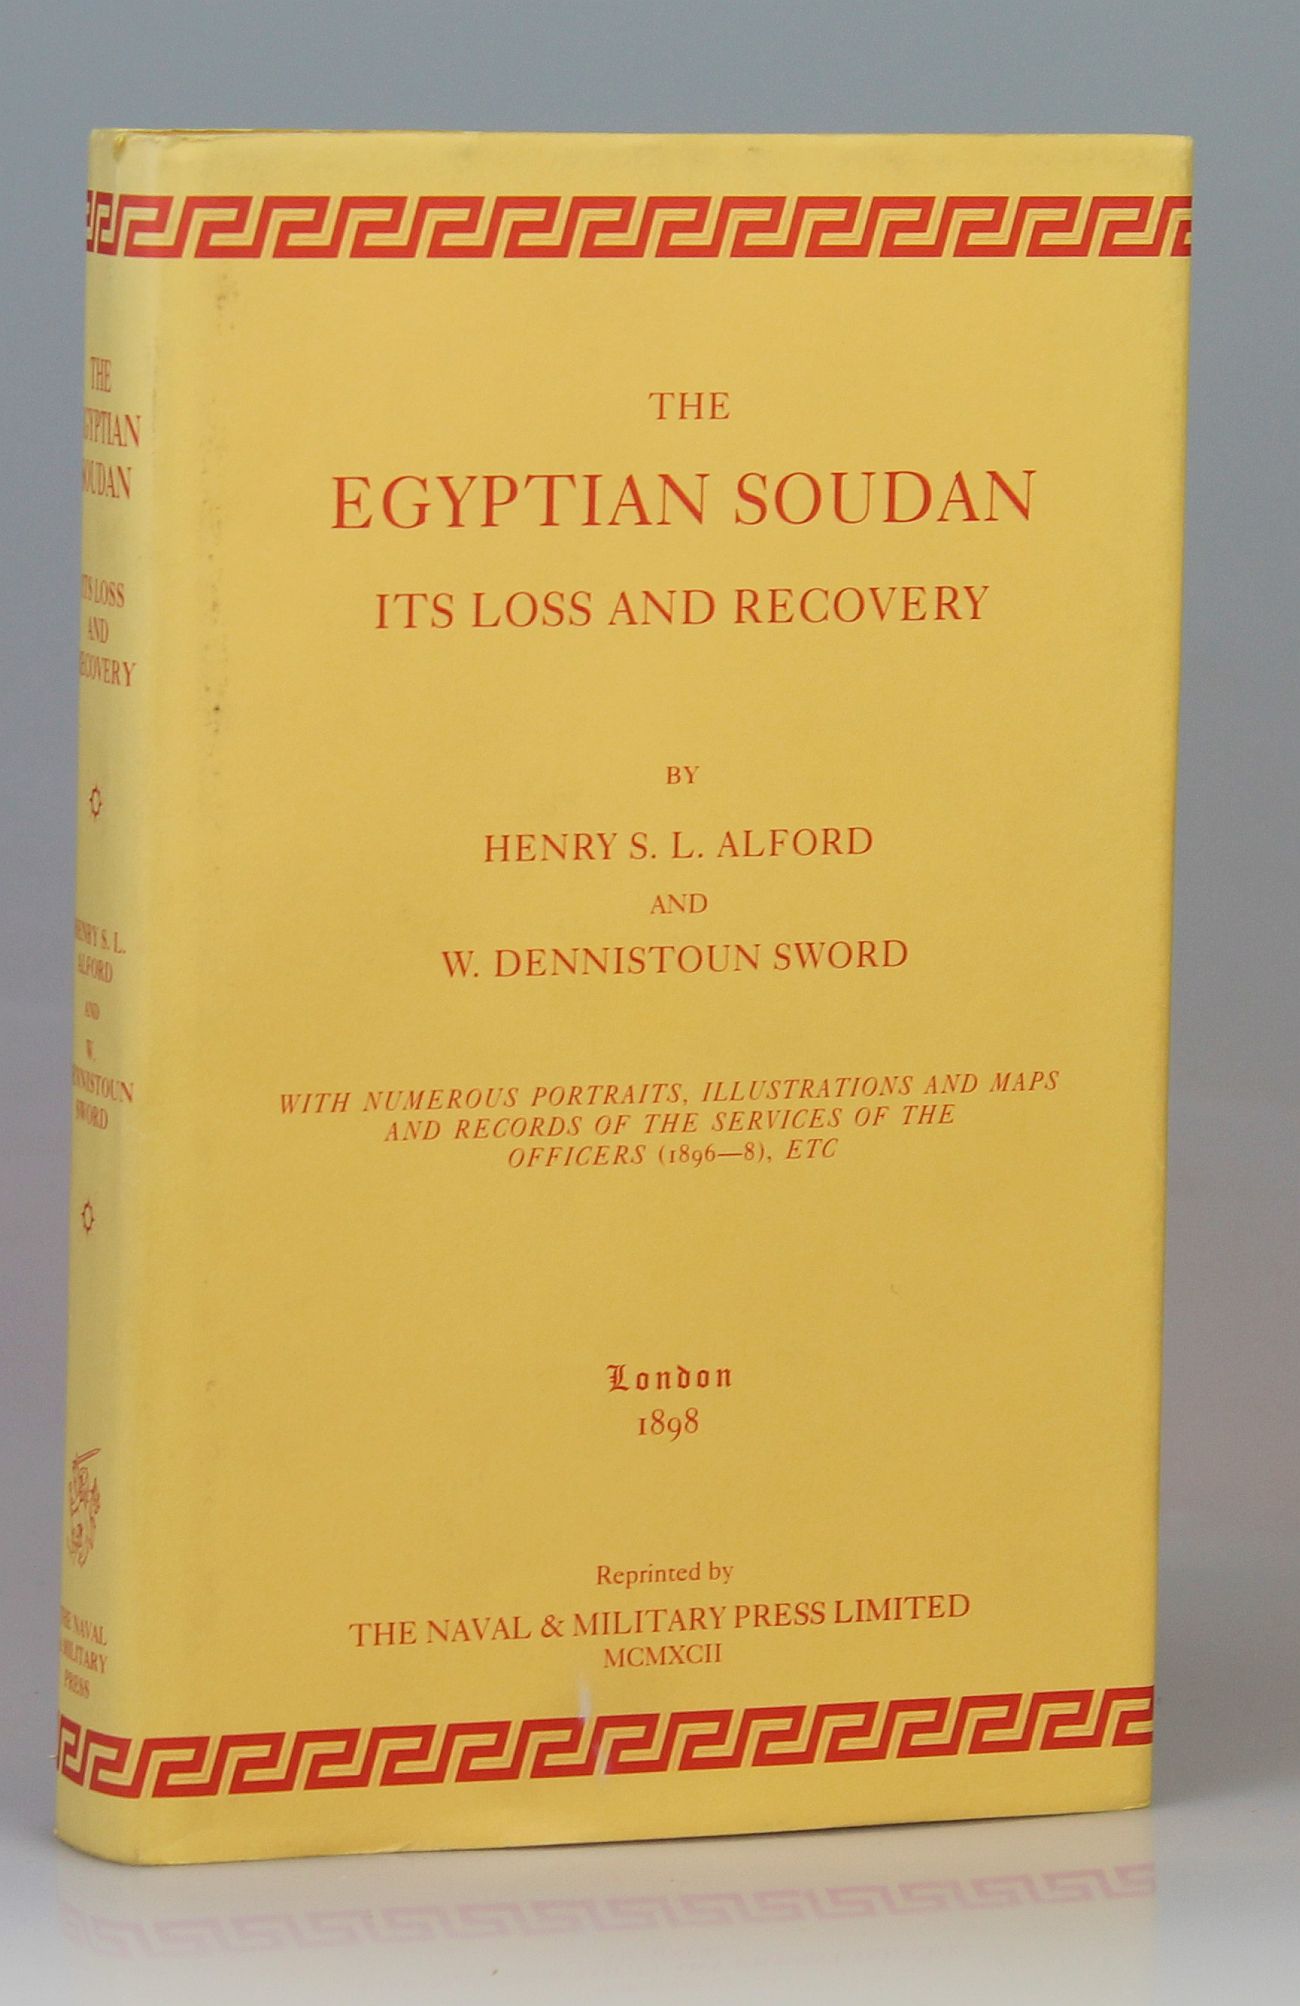 Egyptian Soudan Its Loss and Recovery - Henry S L Alford And W Denniston Sword